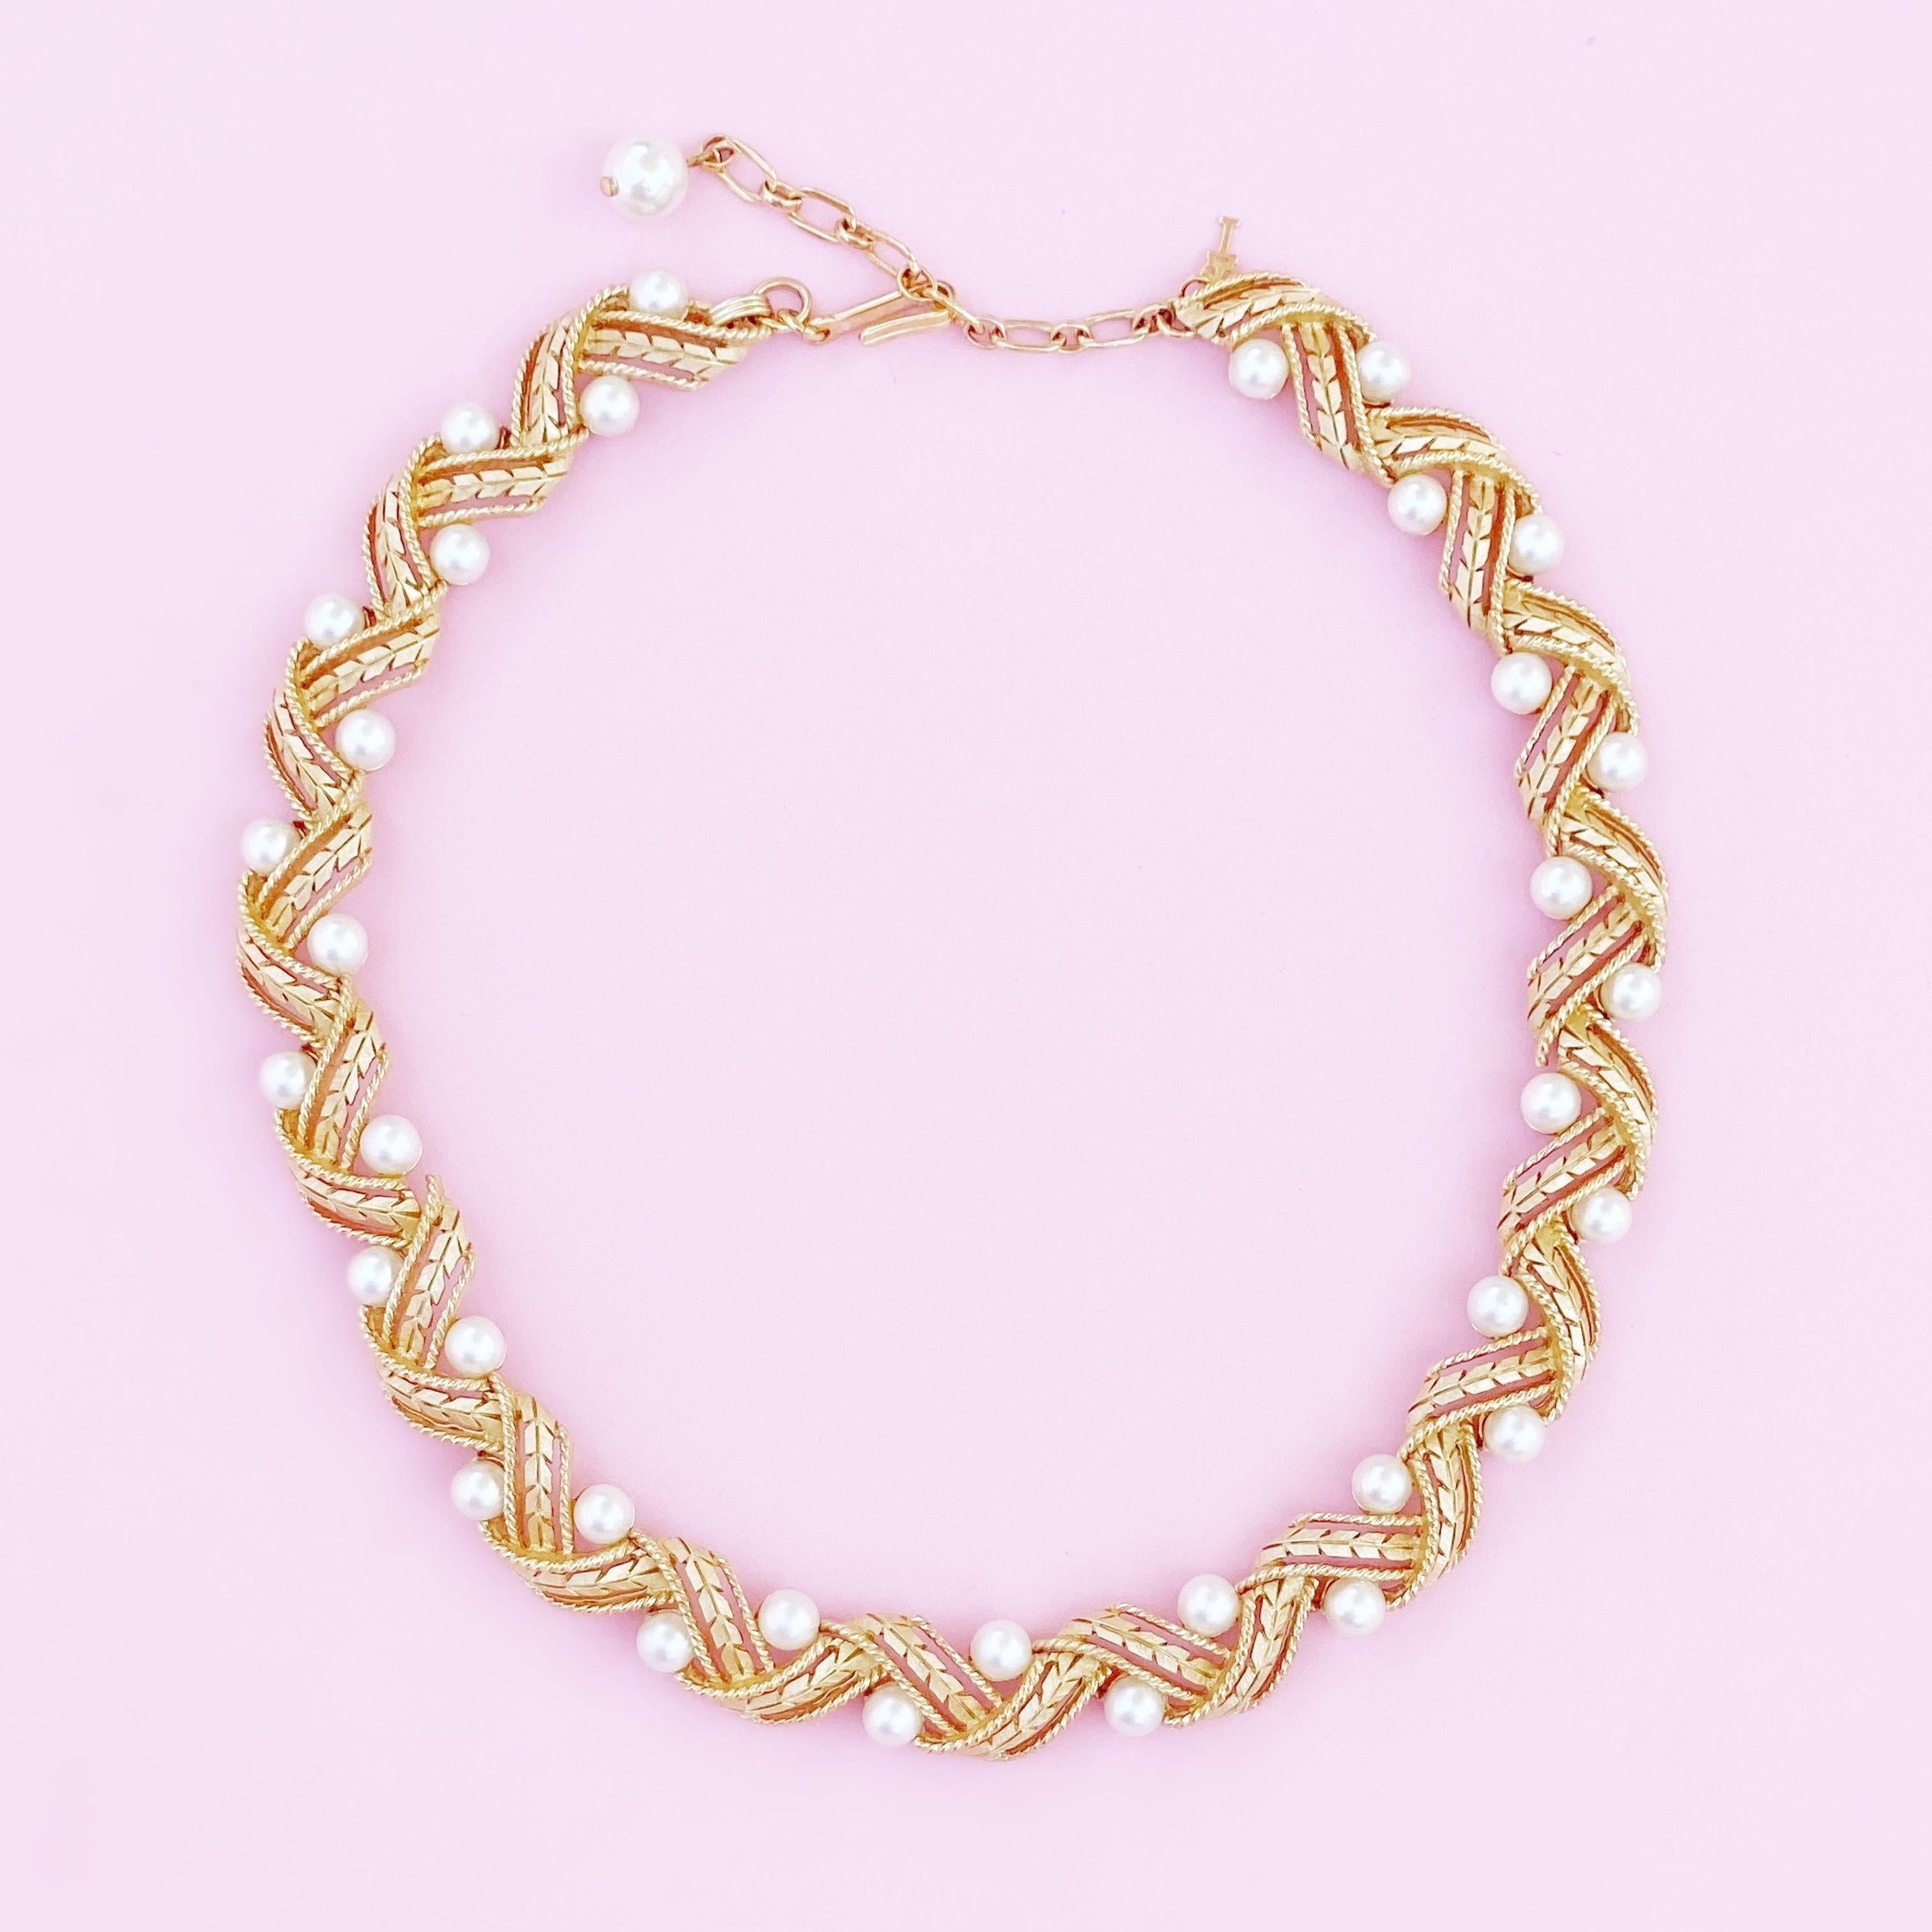 Modern Gilt & Pearl Choker Necklace With Leaf Motif By Crown Trifari, 1950s